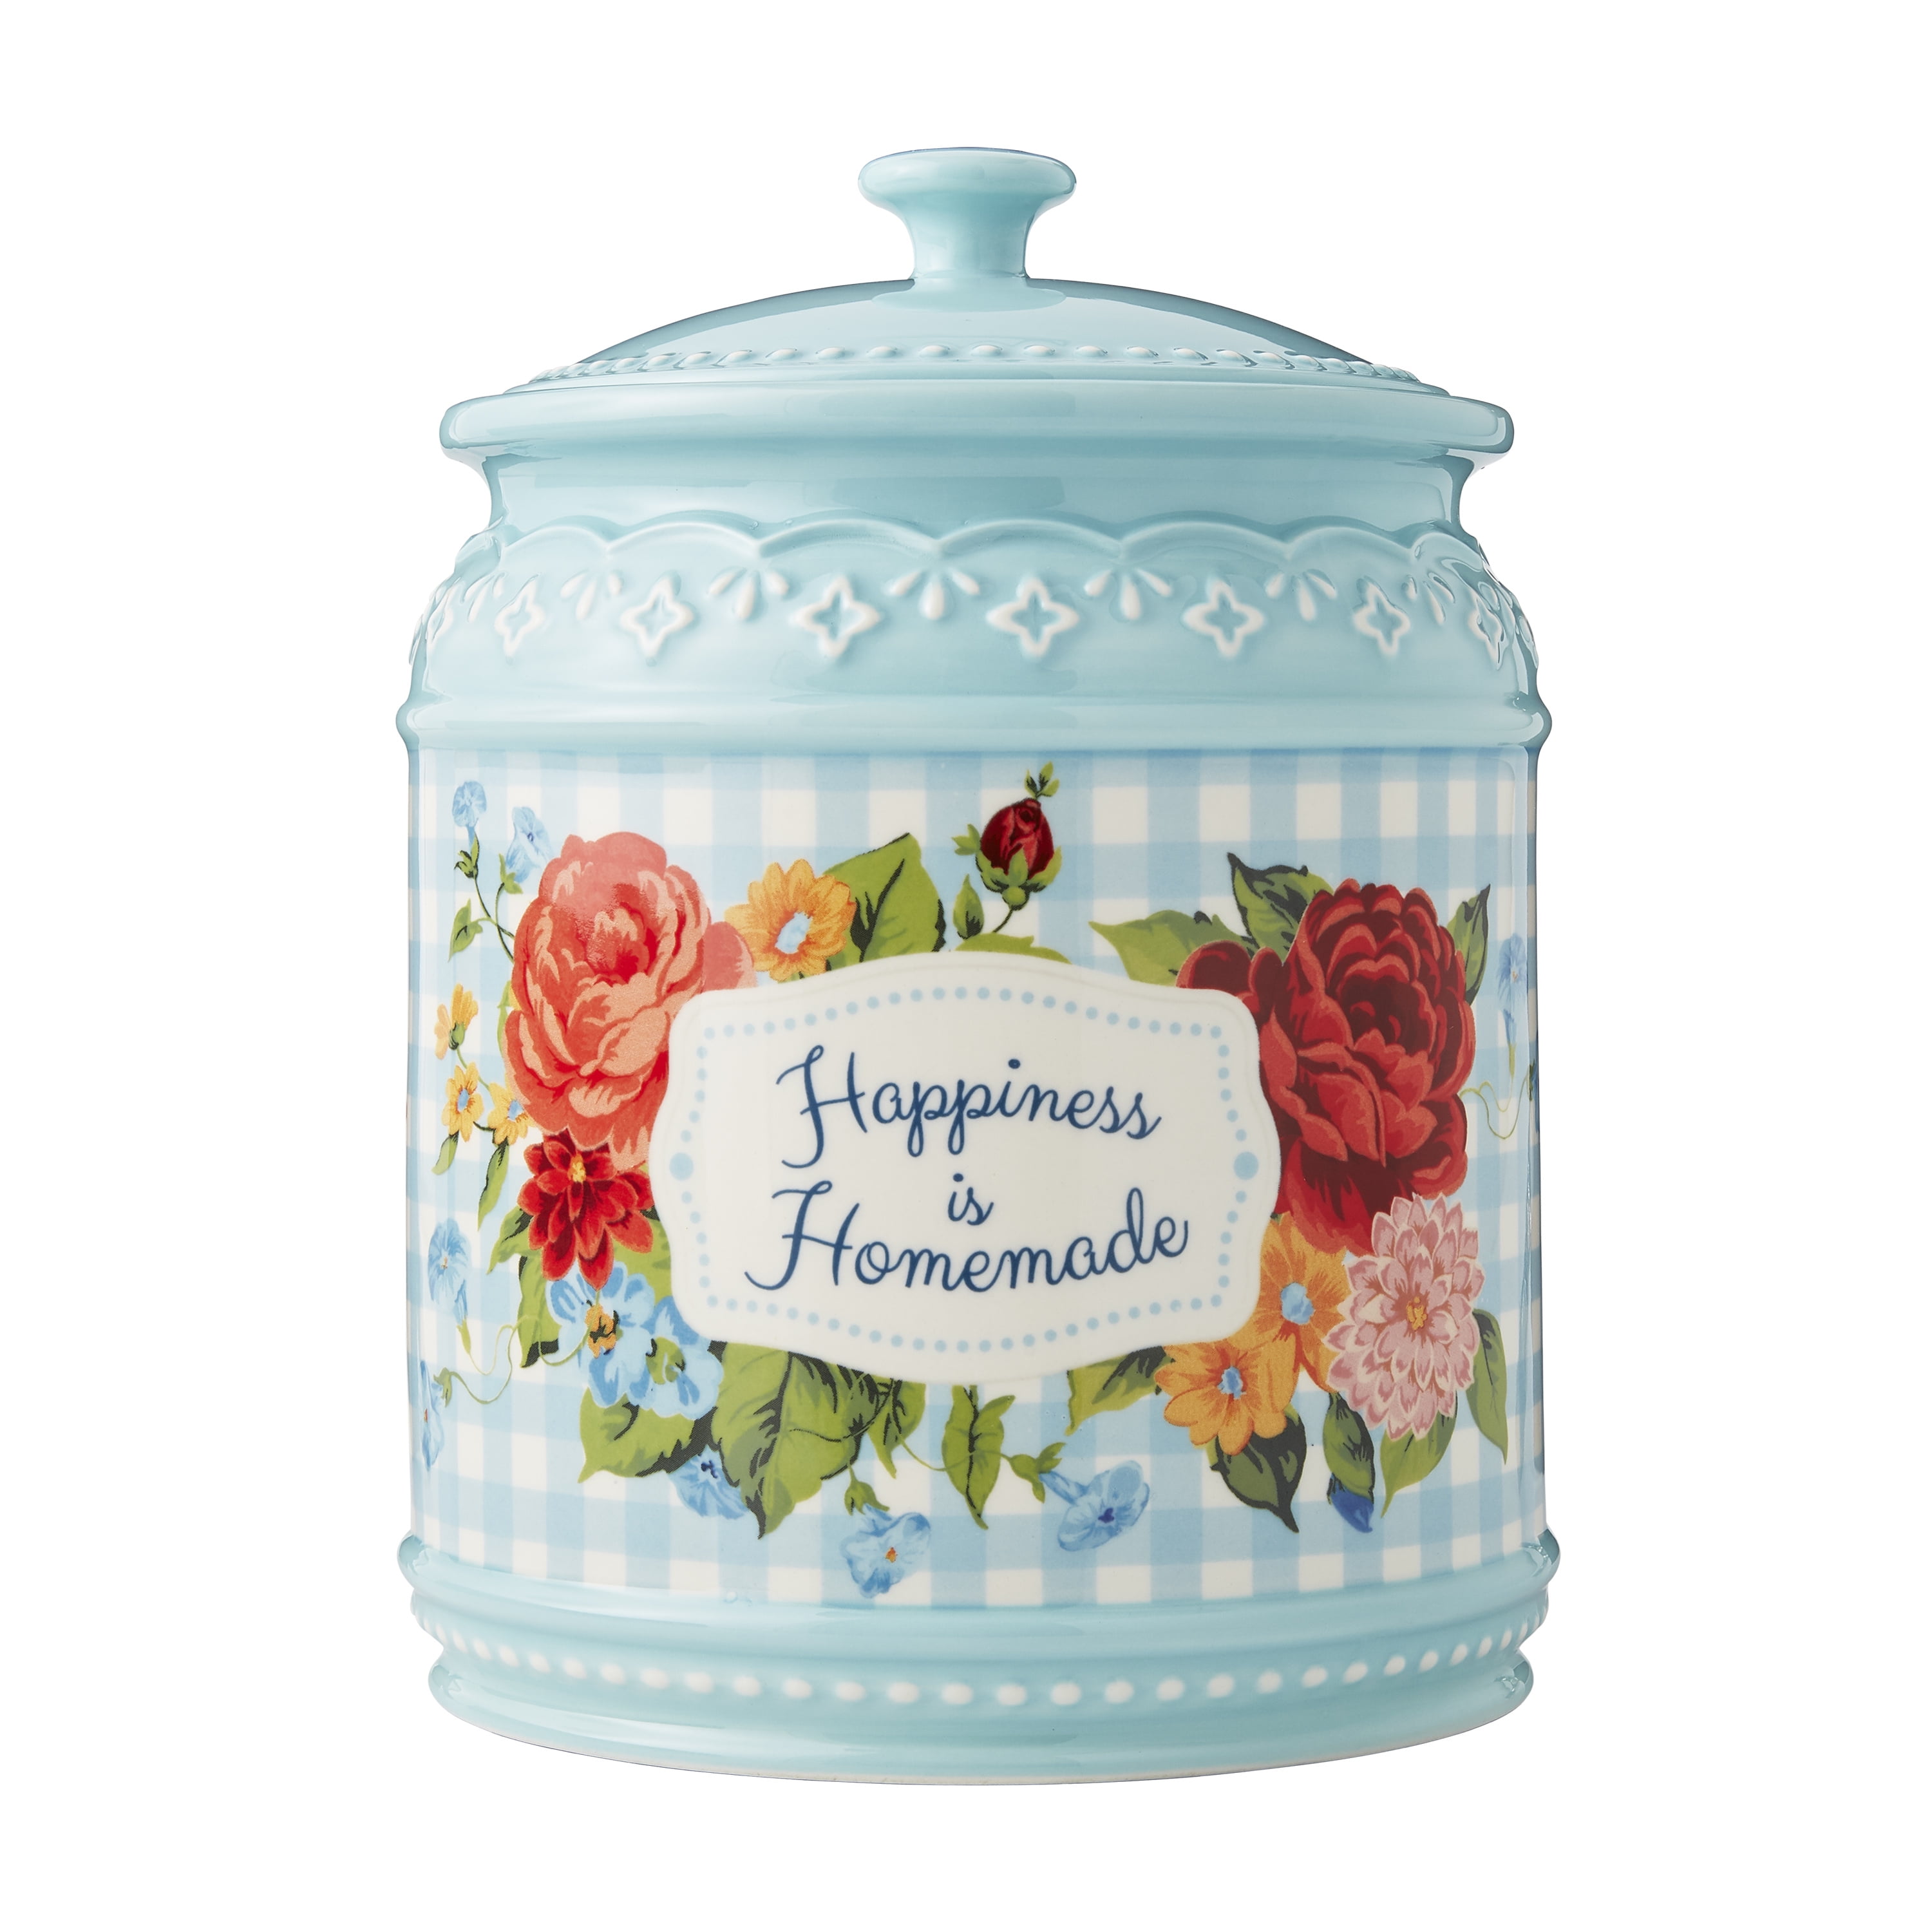 What's new at The Pioneer Woman Mercantile this spring - Postcard Jar Blog